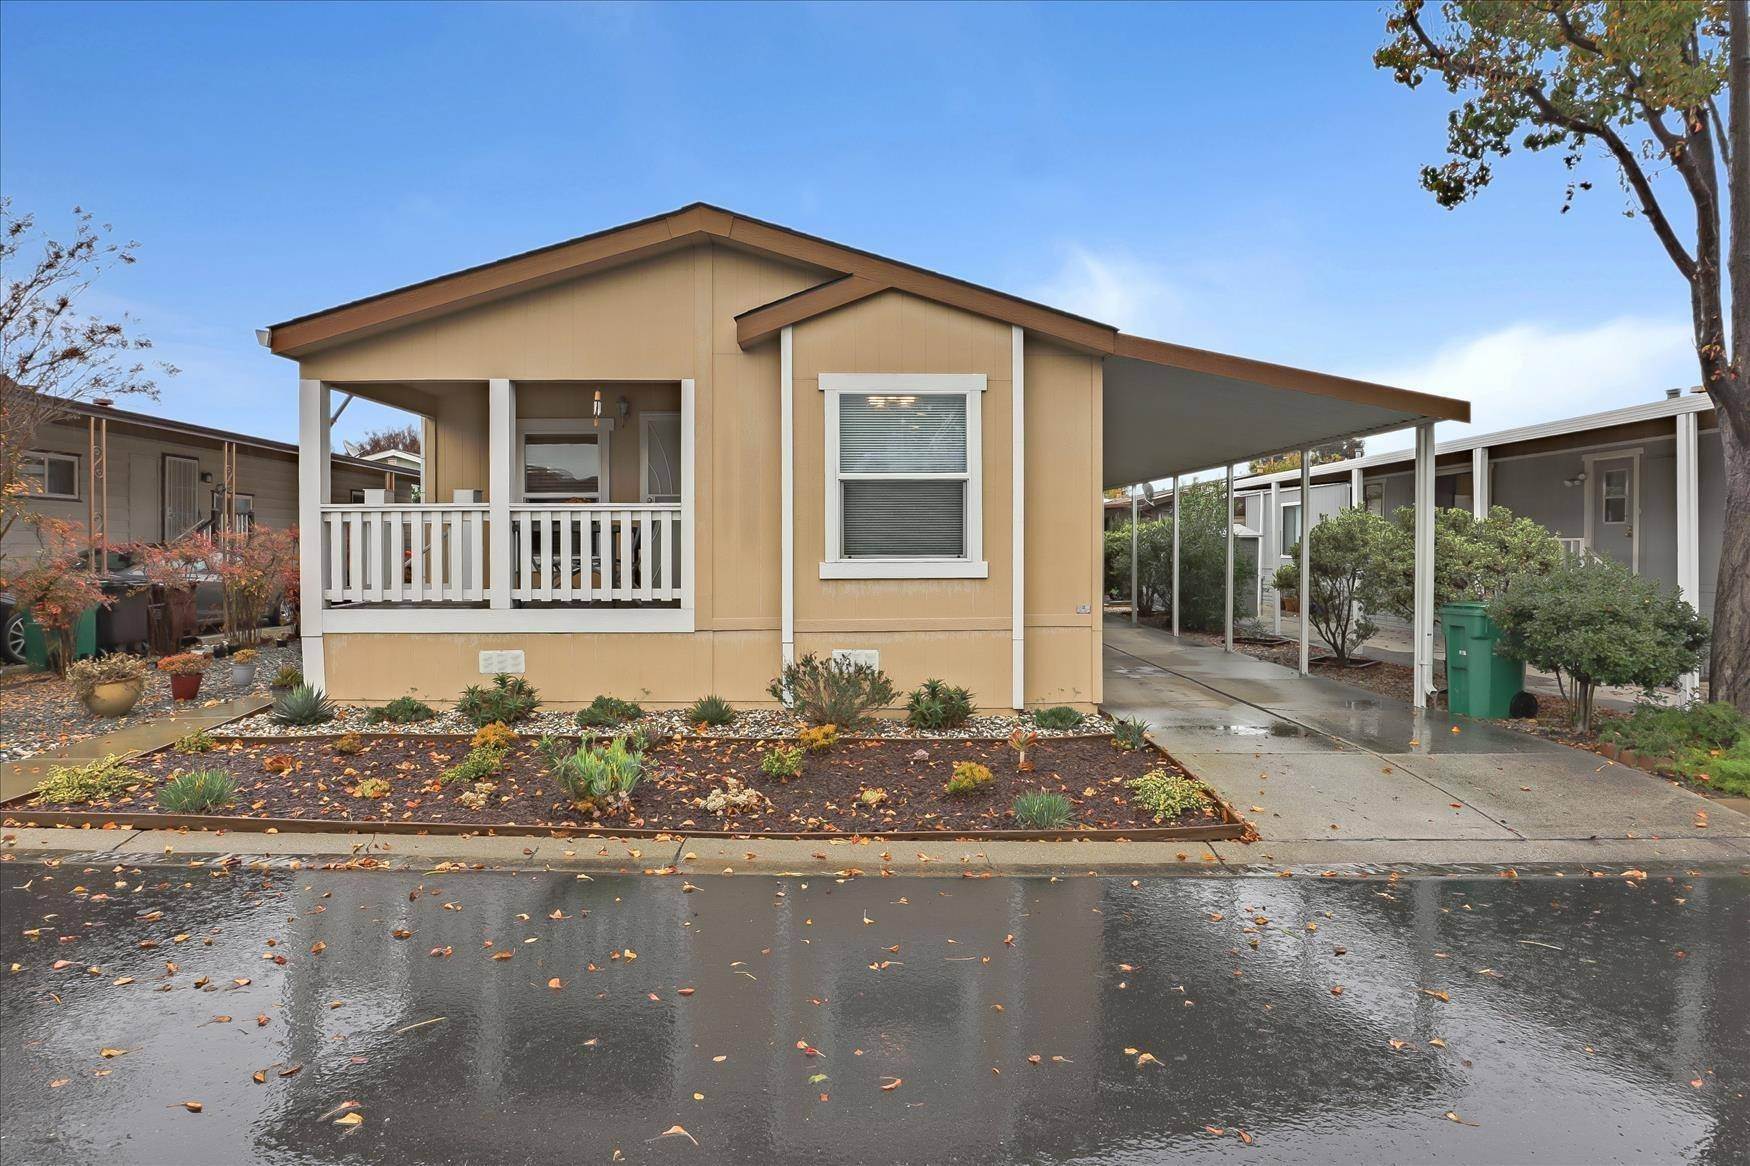 3. Mobile Home for Sale at Hayward, CA 94544